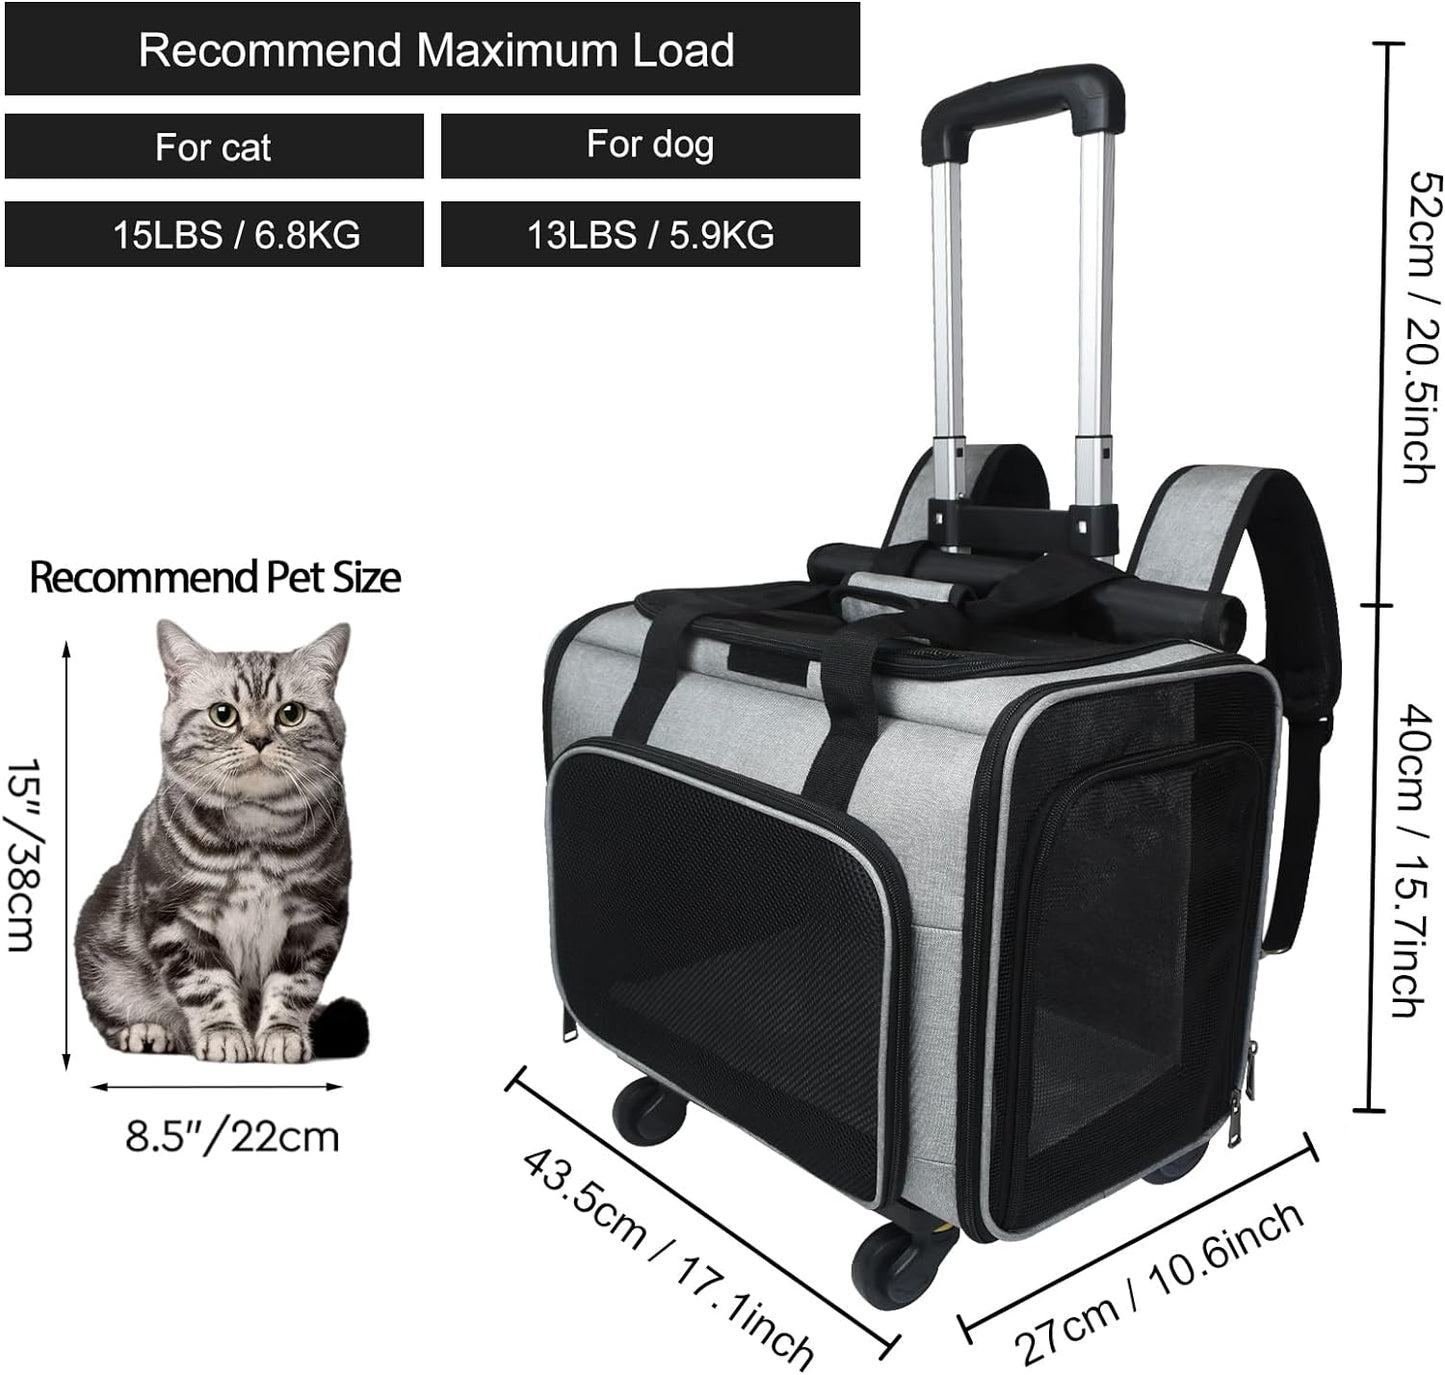 Expandable Pet Carrier Backpack with Wheels - Airline Approved, Large Space, Durable Handle, Flexible Rolling Design, and Breathable Mesh Panels (Ideal for Most Airplanes)